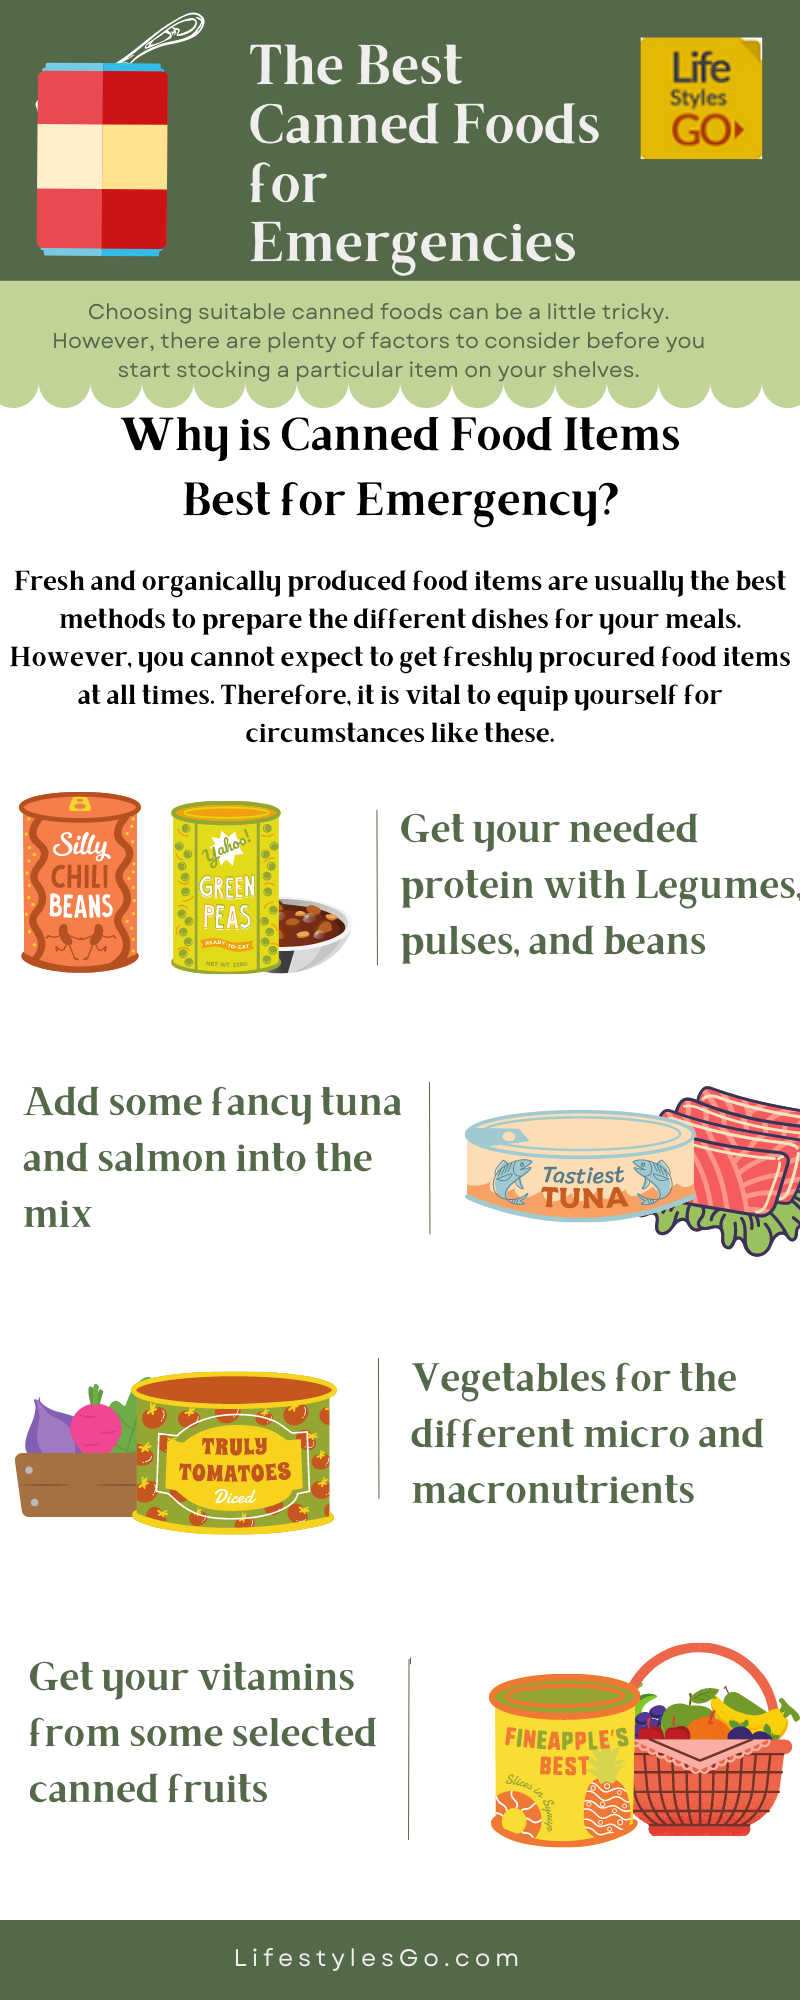 Best canned foods infographic